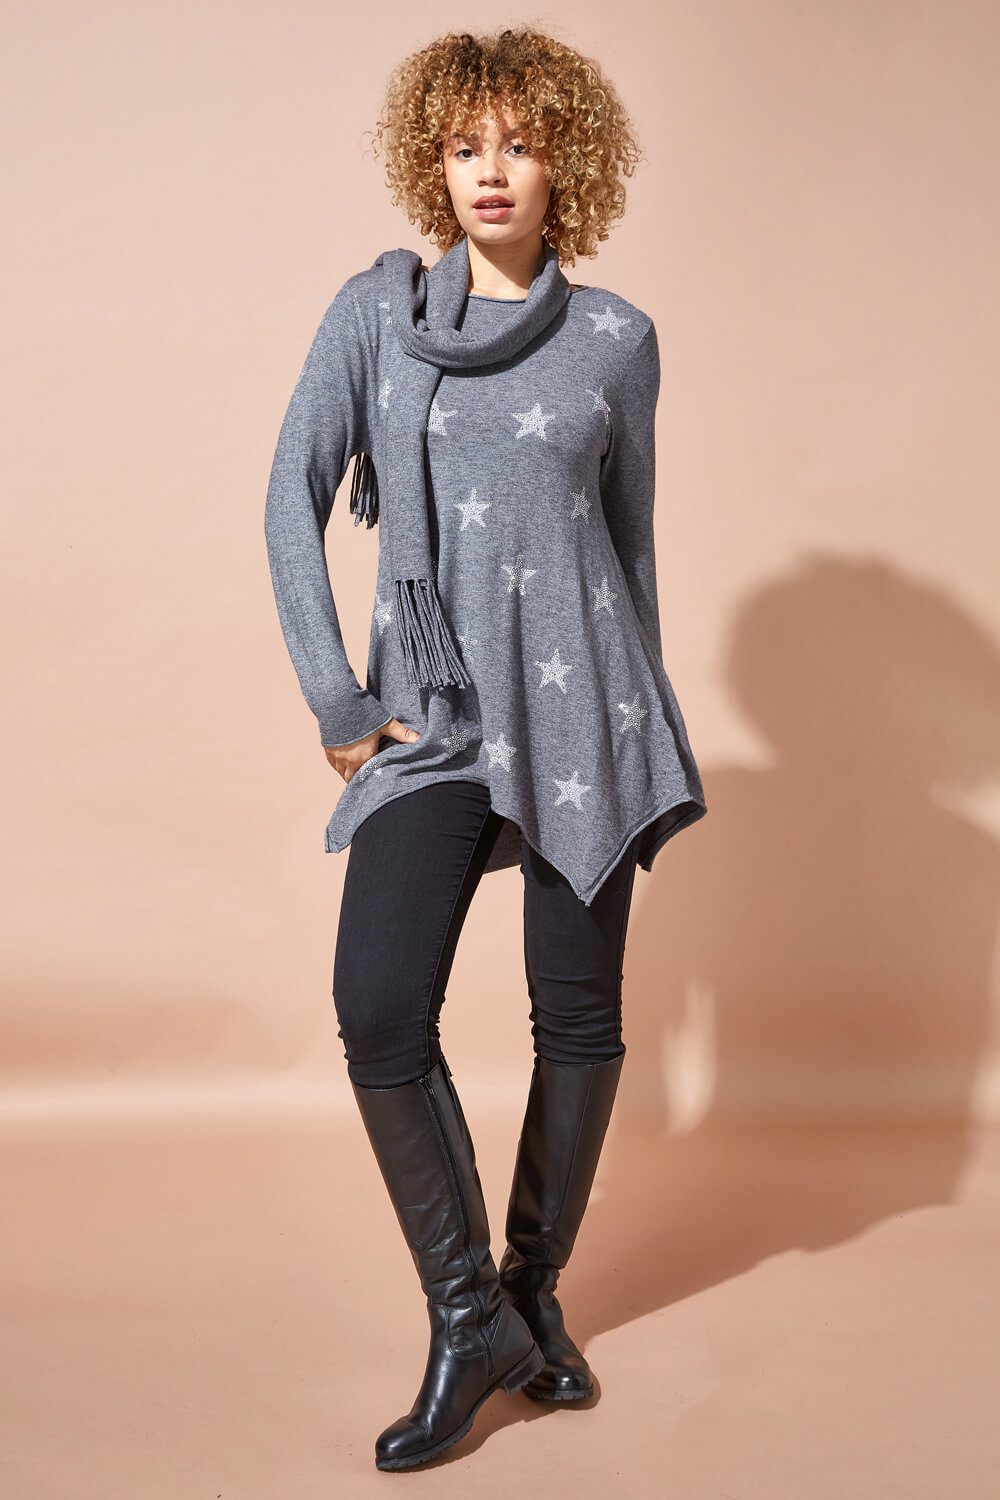 Light-Grey Star Print Knitted Tunic with Tassel Scarf, Image 2 of 4